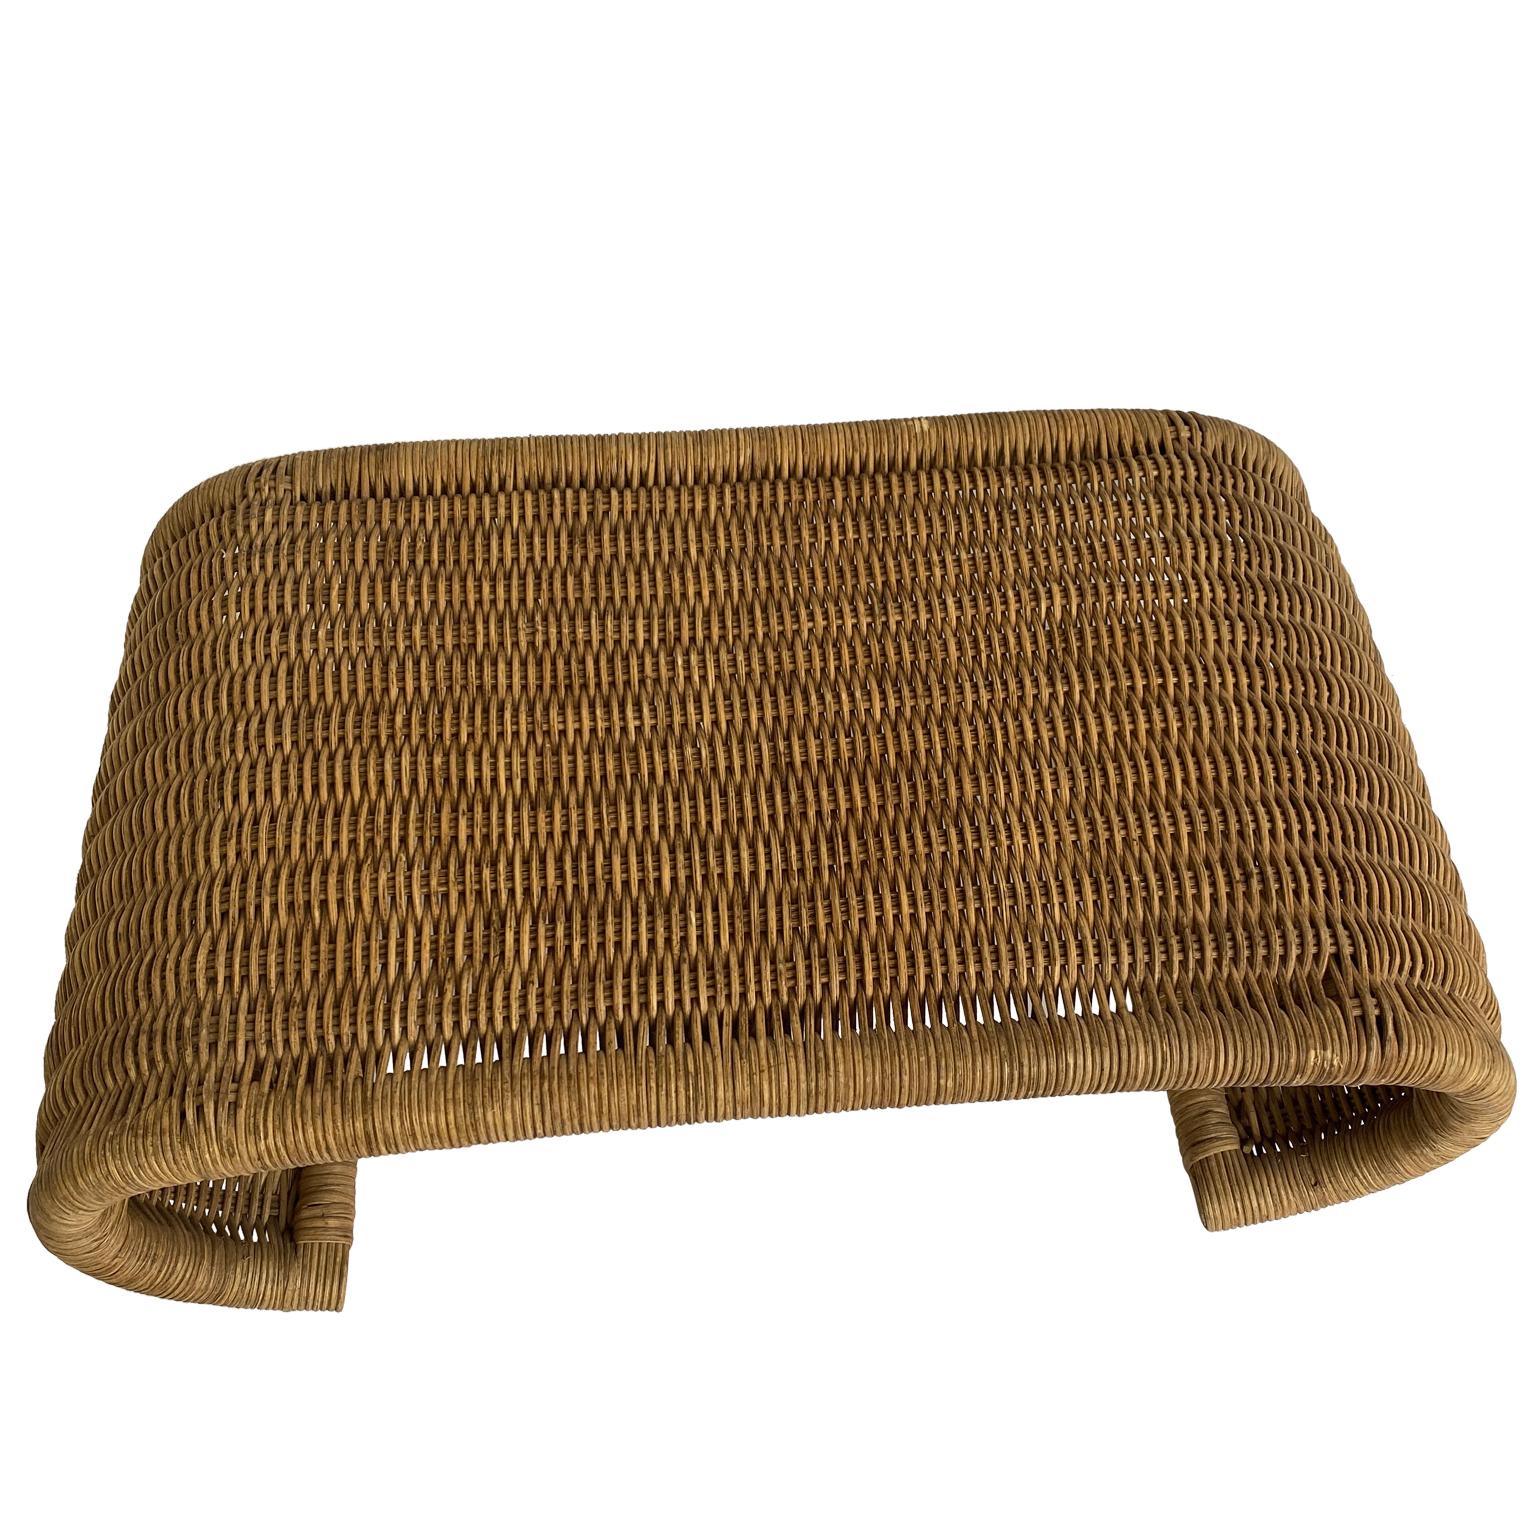 Wicker table perfect for bed or lap table with Ming scrolled sides. This table is the perfect size for a breakfast in bed table, laptop or an occasional side table to display art. This lovely wicker piece is sturdy; wicker is in very good condition